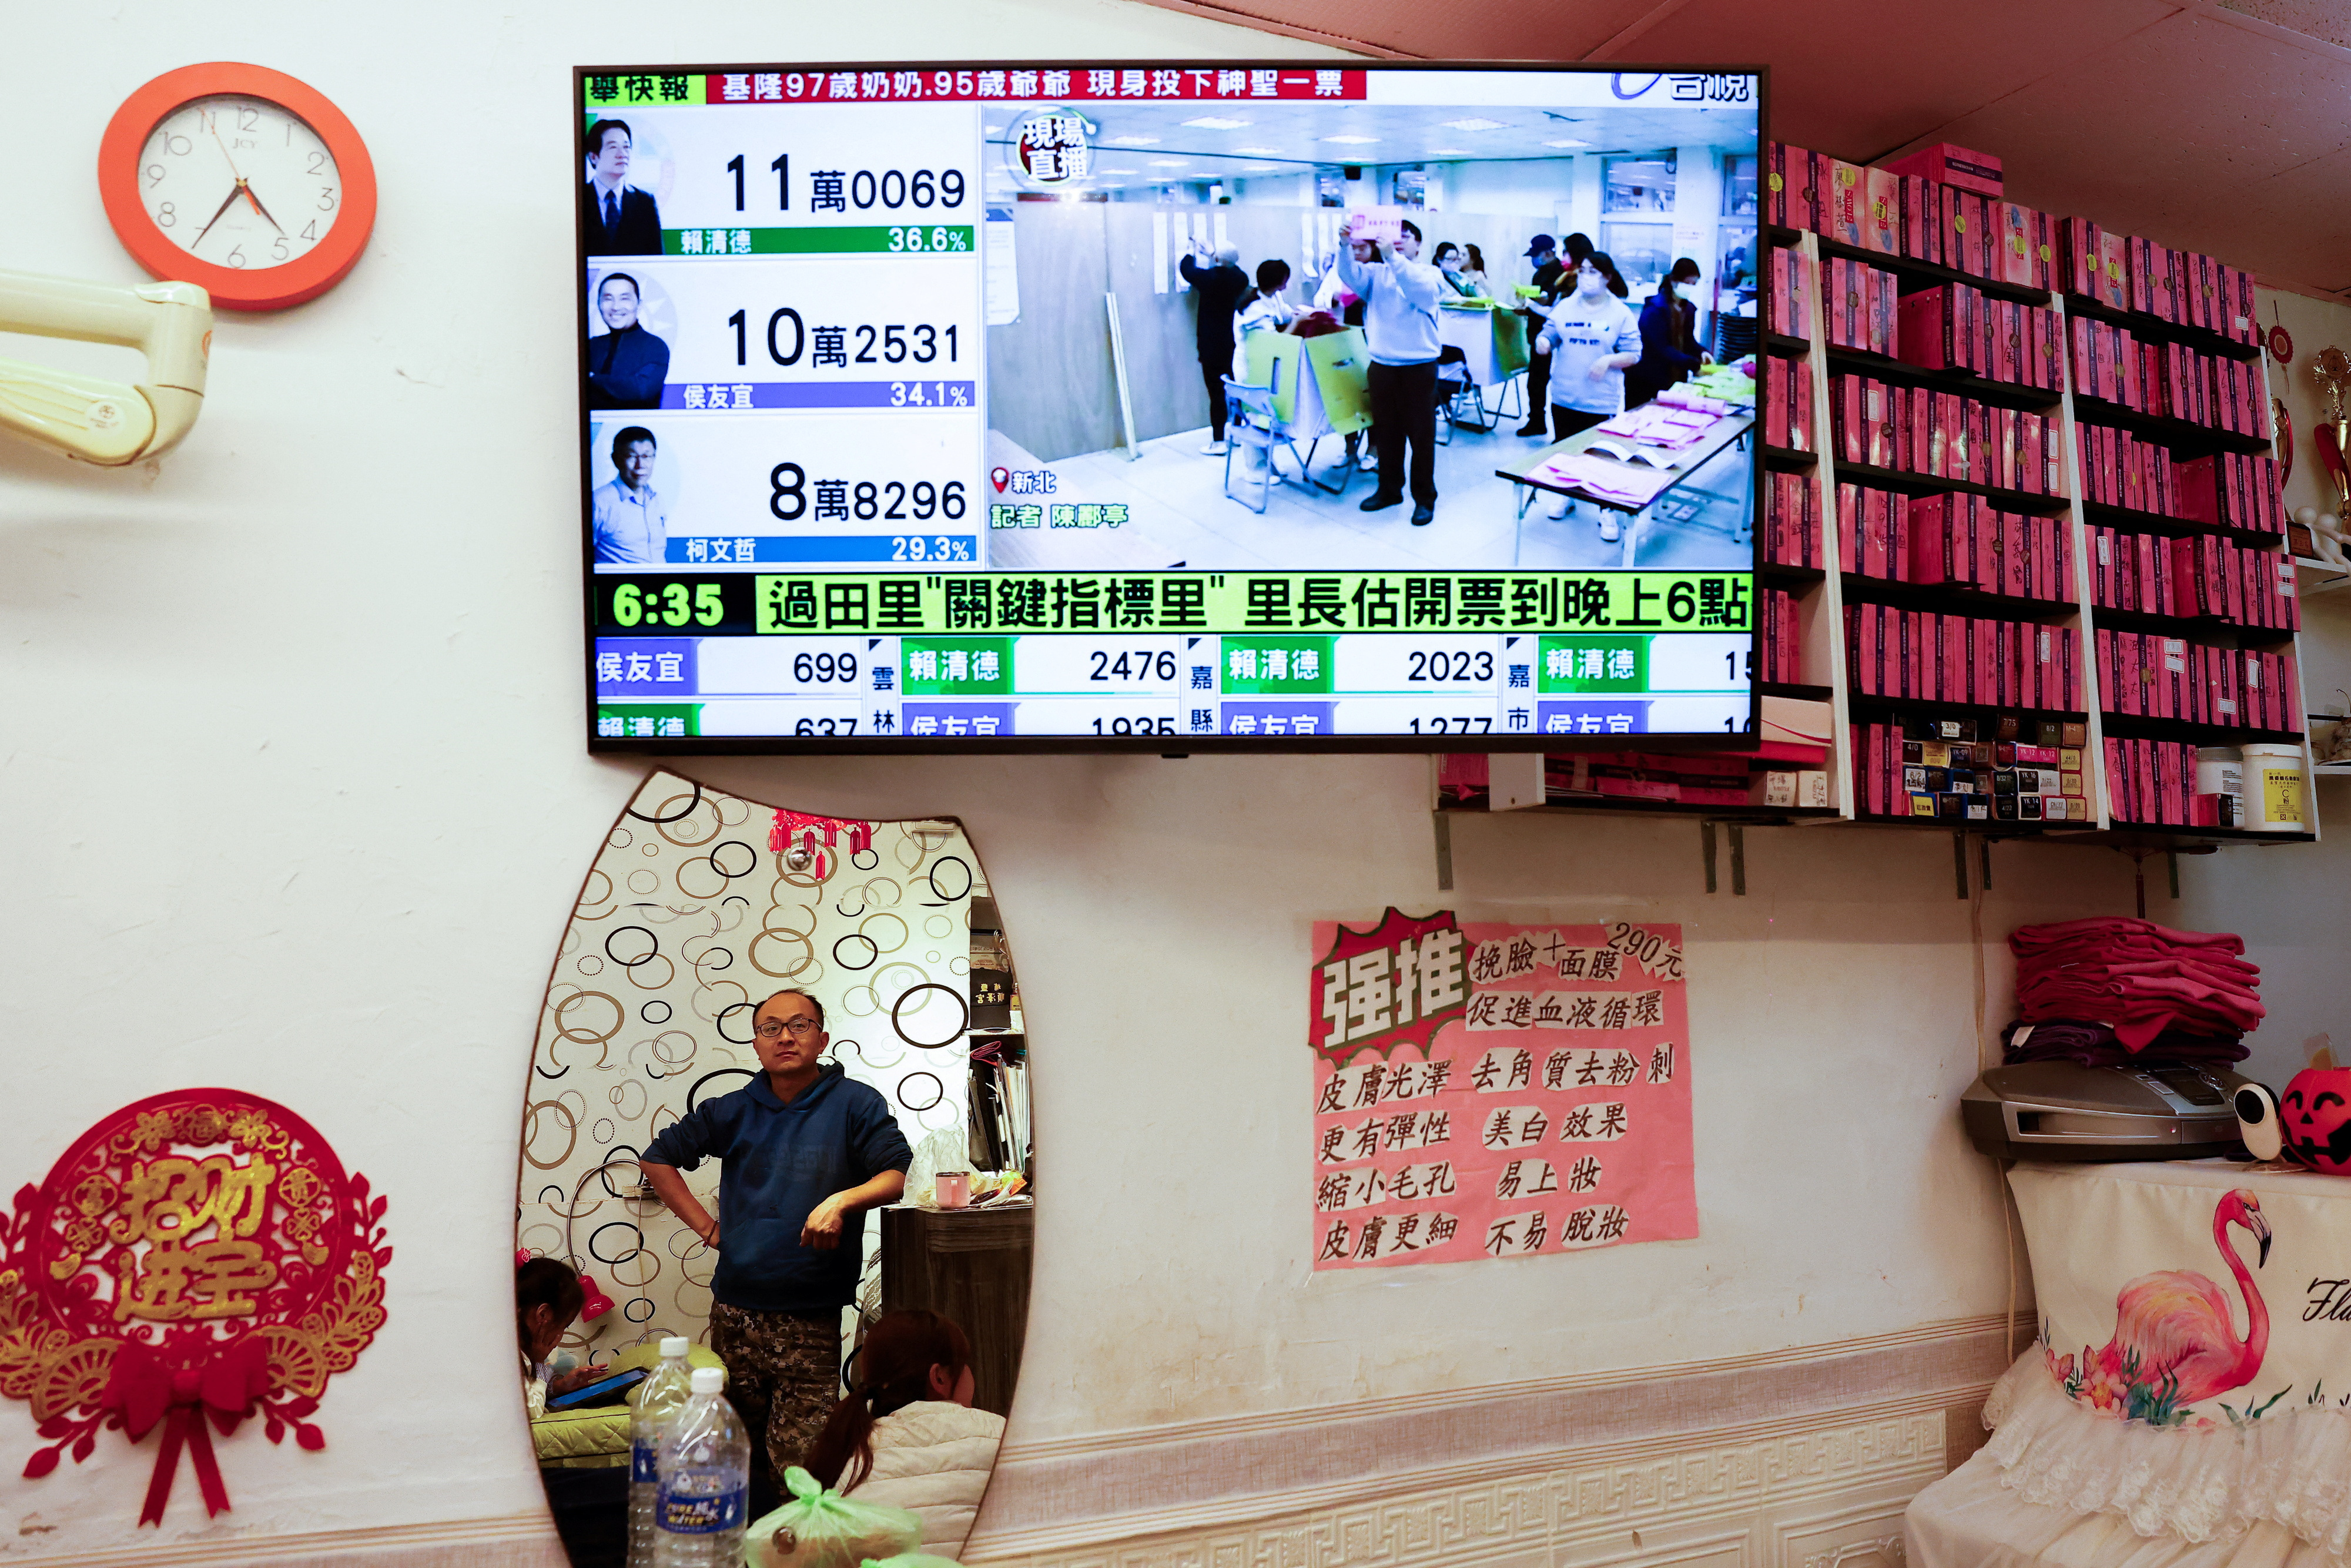 A screen shows a news update on the polling in the presidential and parliamentary elections in Taipei